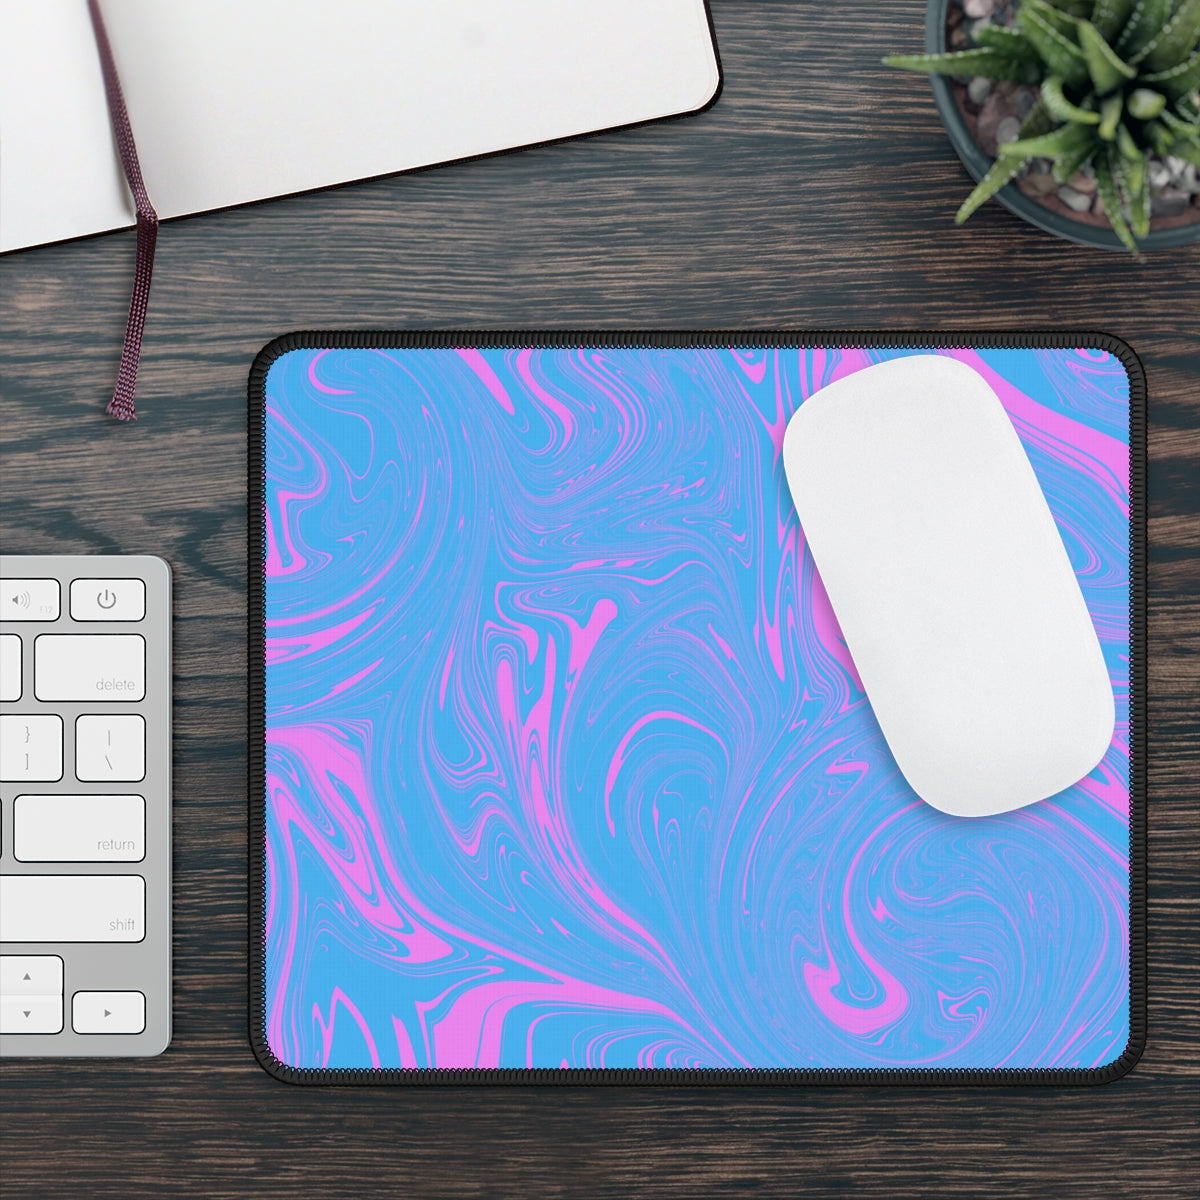 Blue & Pink Swirl Gaming Mouse Pad - Desk Cookies